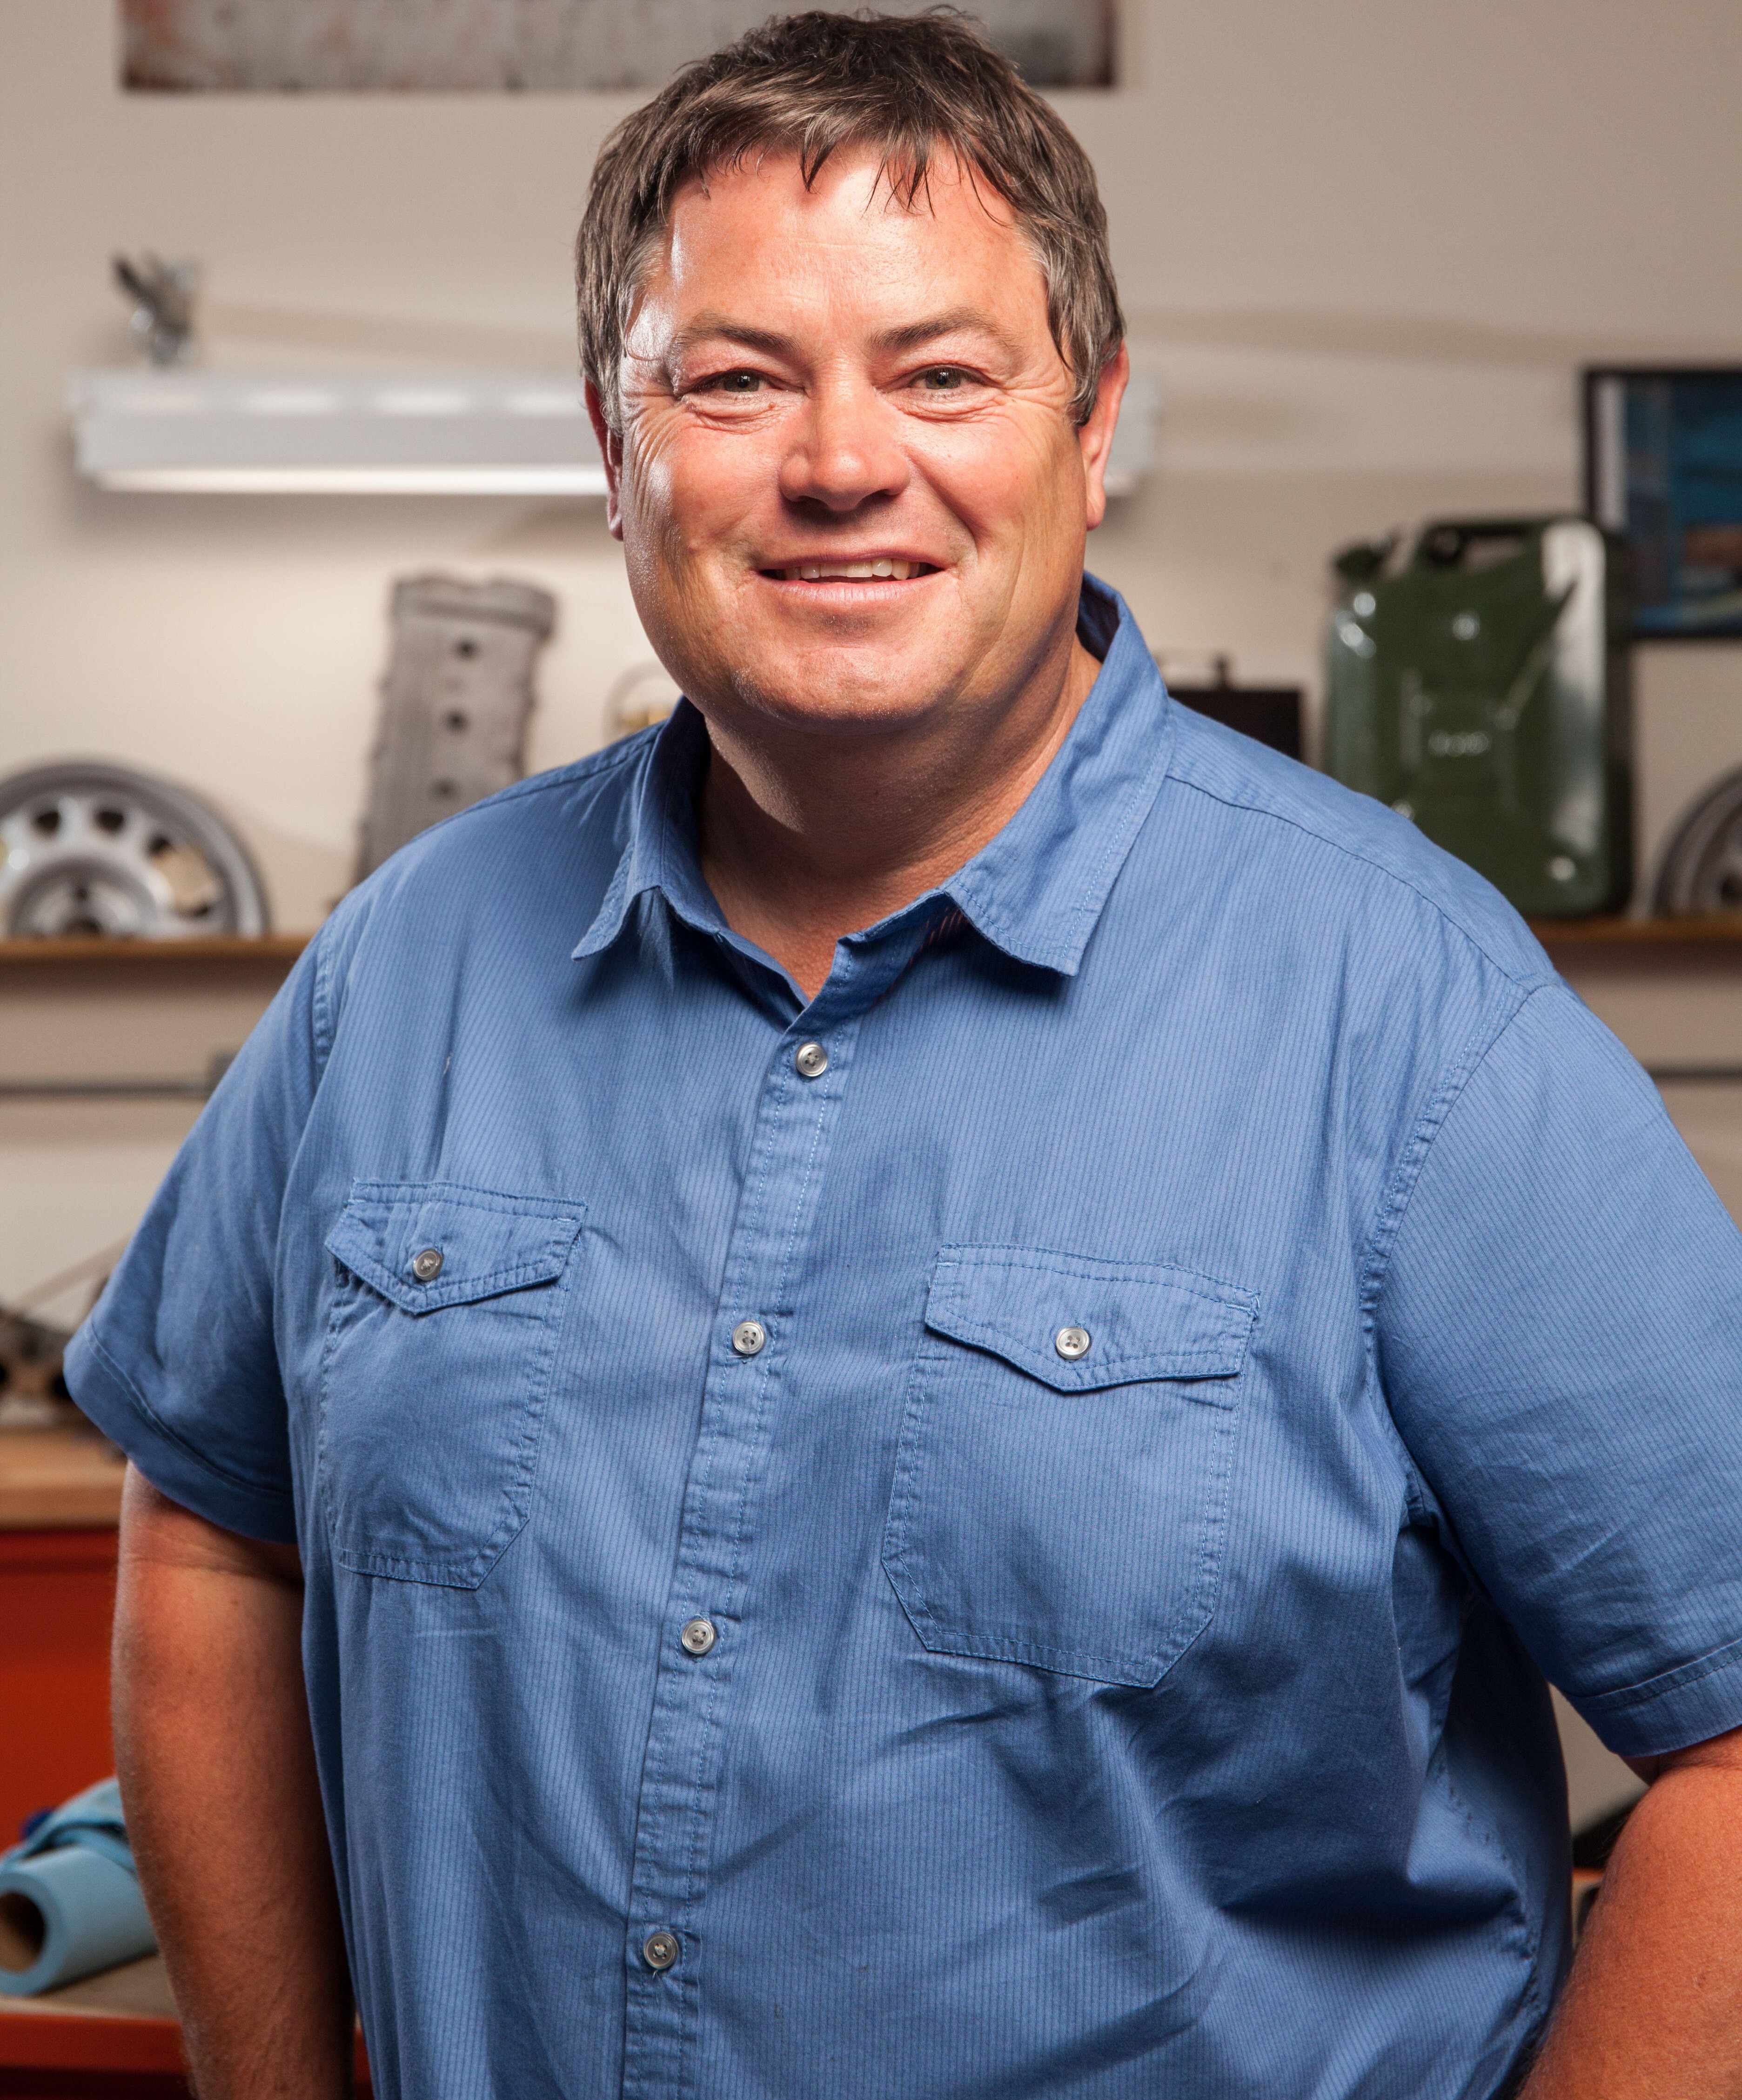 Wheeler Dealers presenter Mike Brewer has opened up about cleaning tools at his dad's garage prior to his successful career